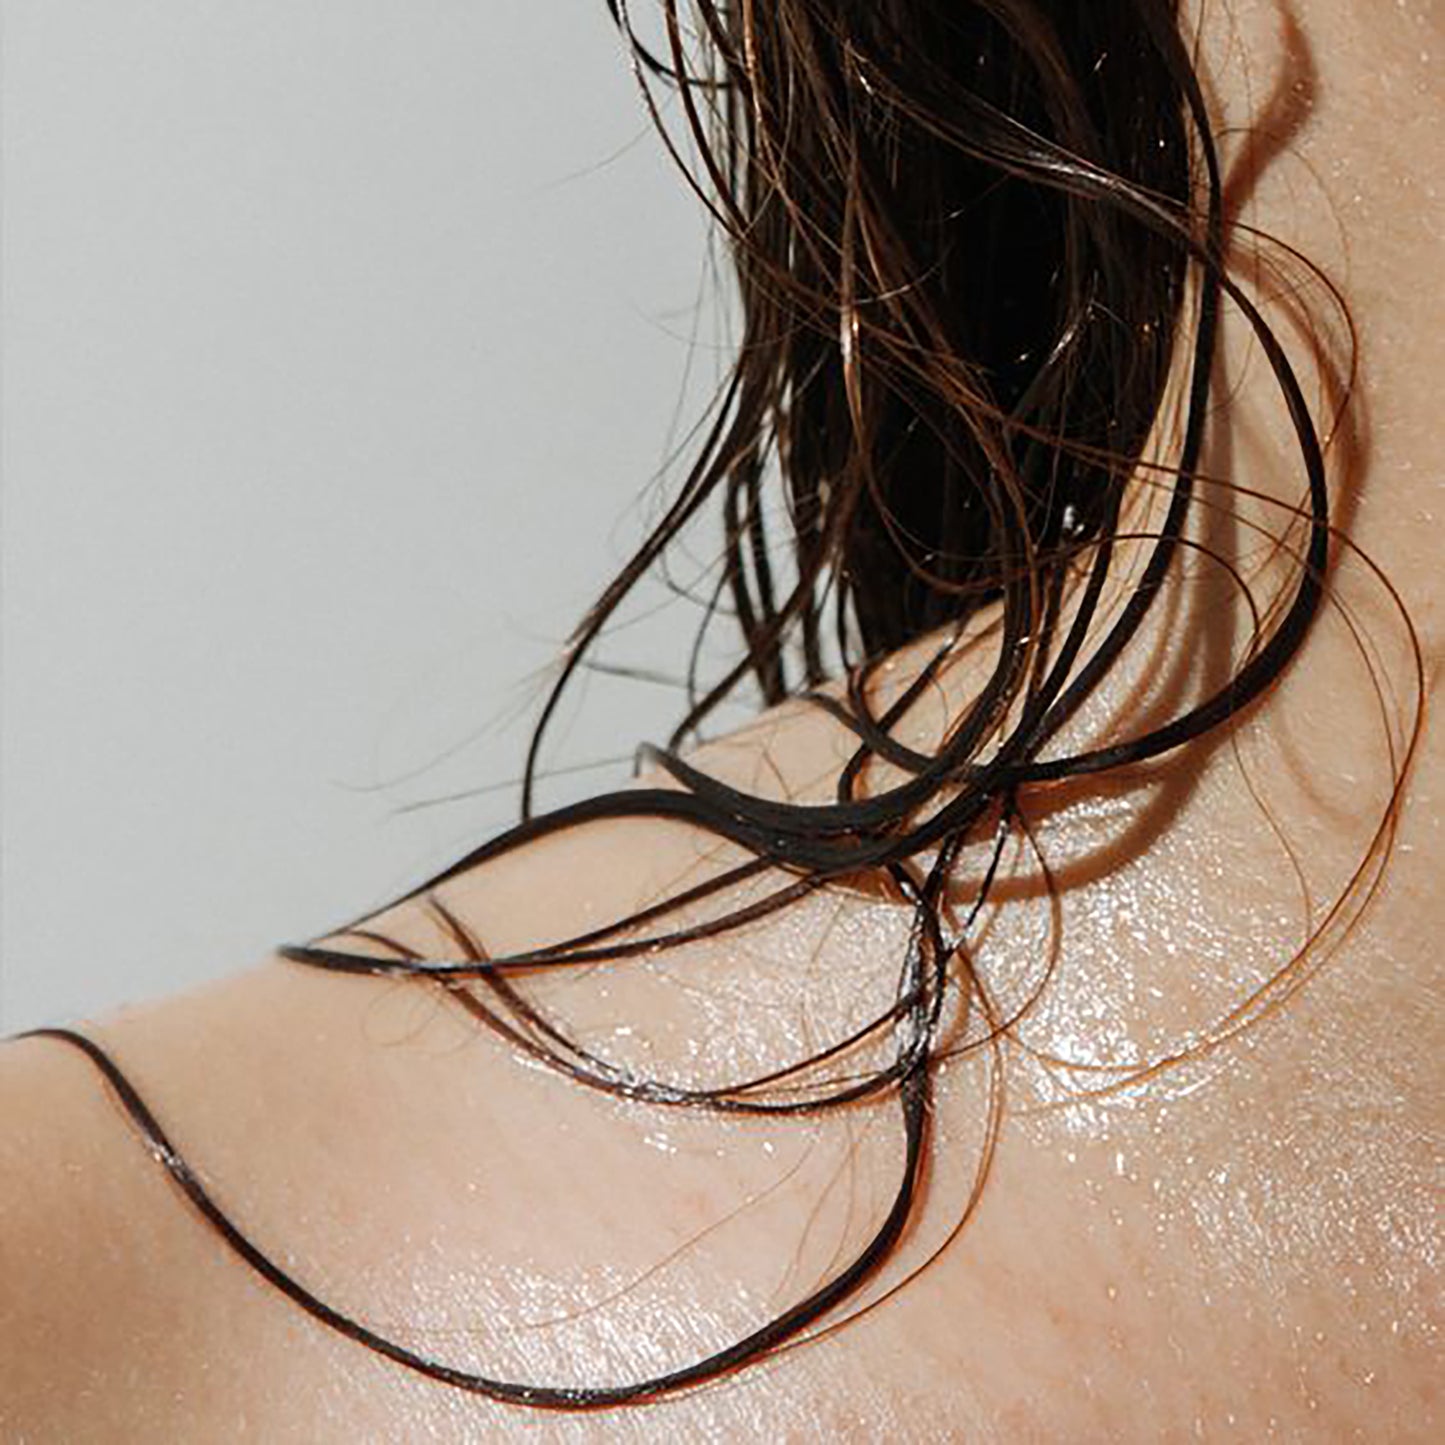 mood image showing woman's skin